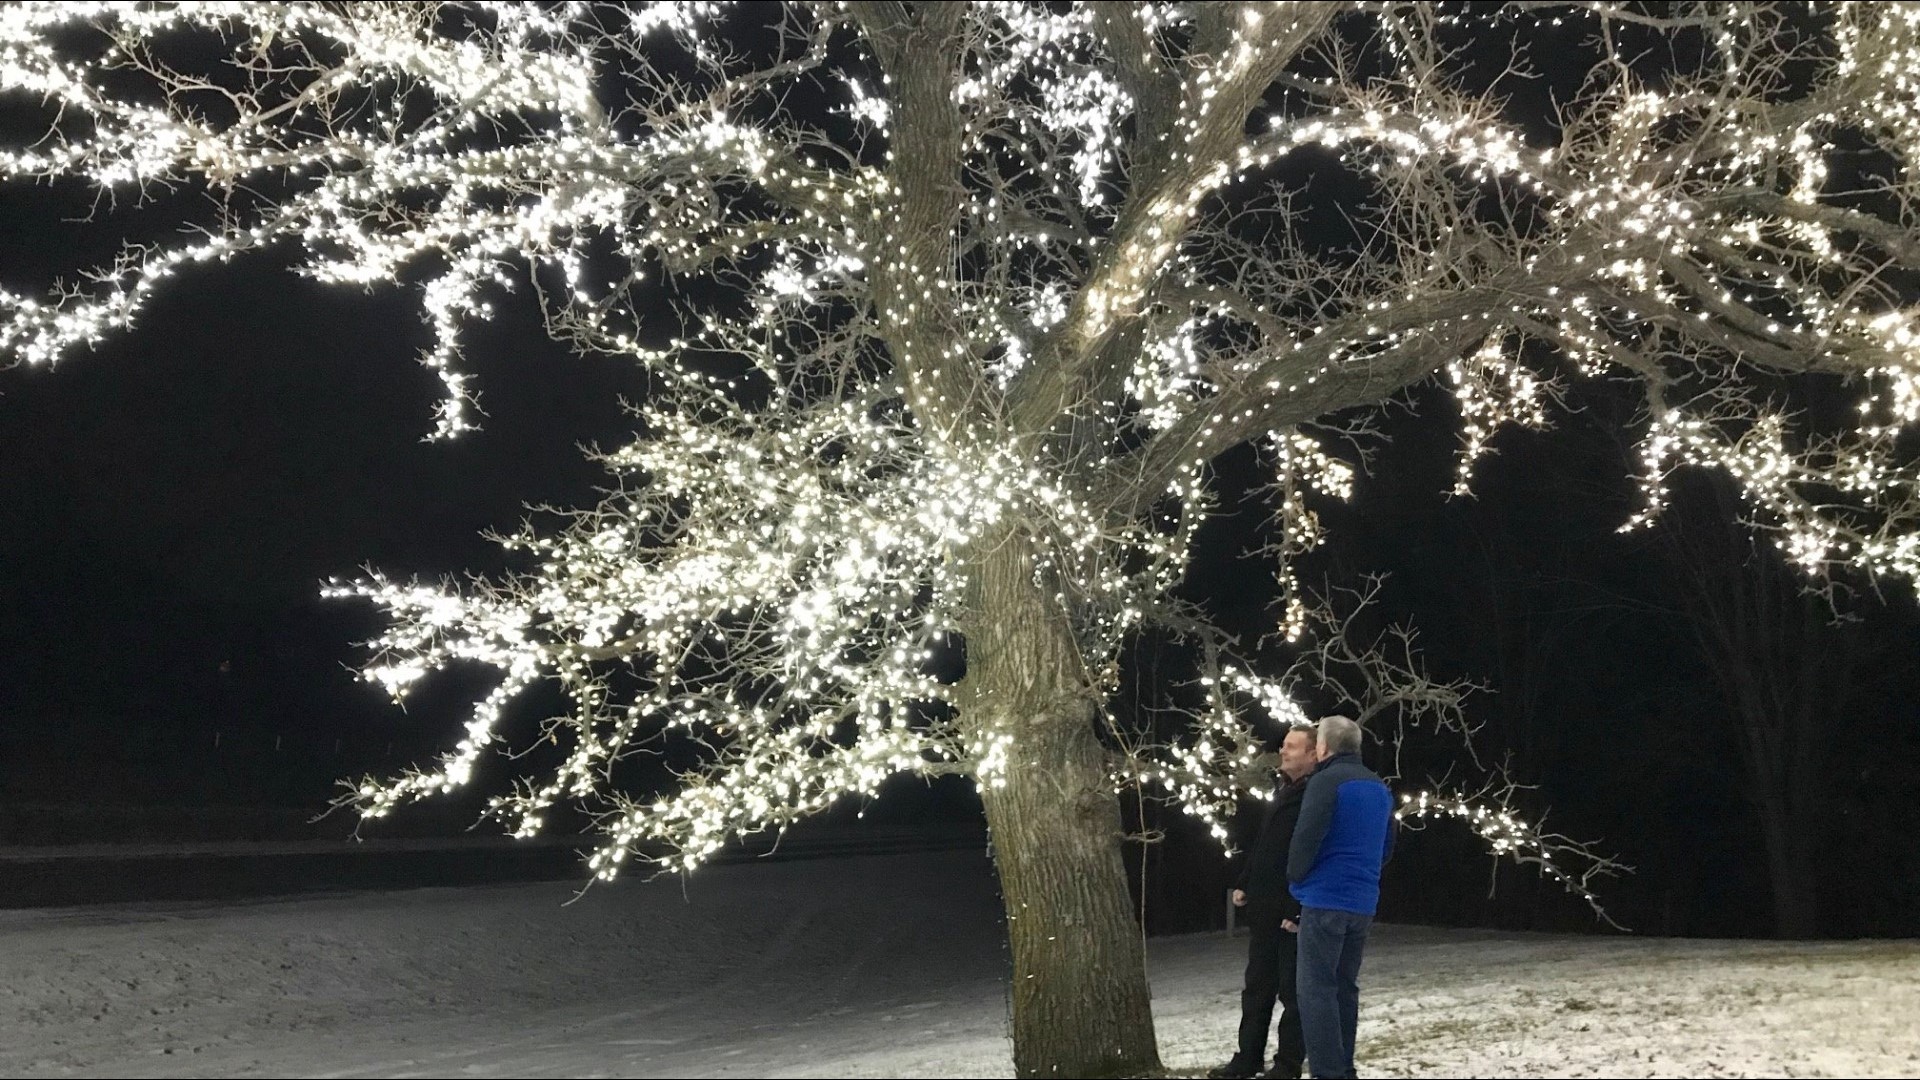 It's hard to miss a 40-foot oak tree adorned with 45,000 white lights.